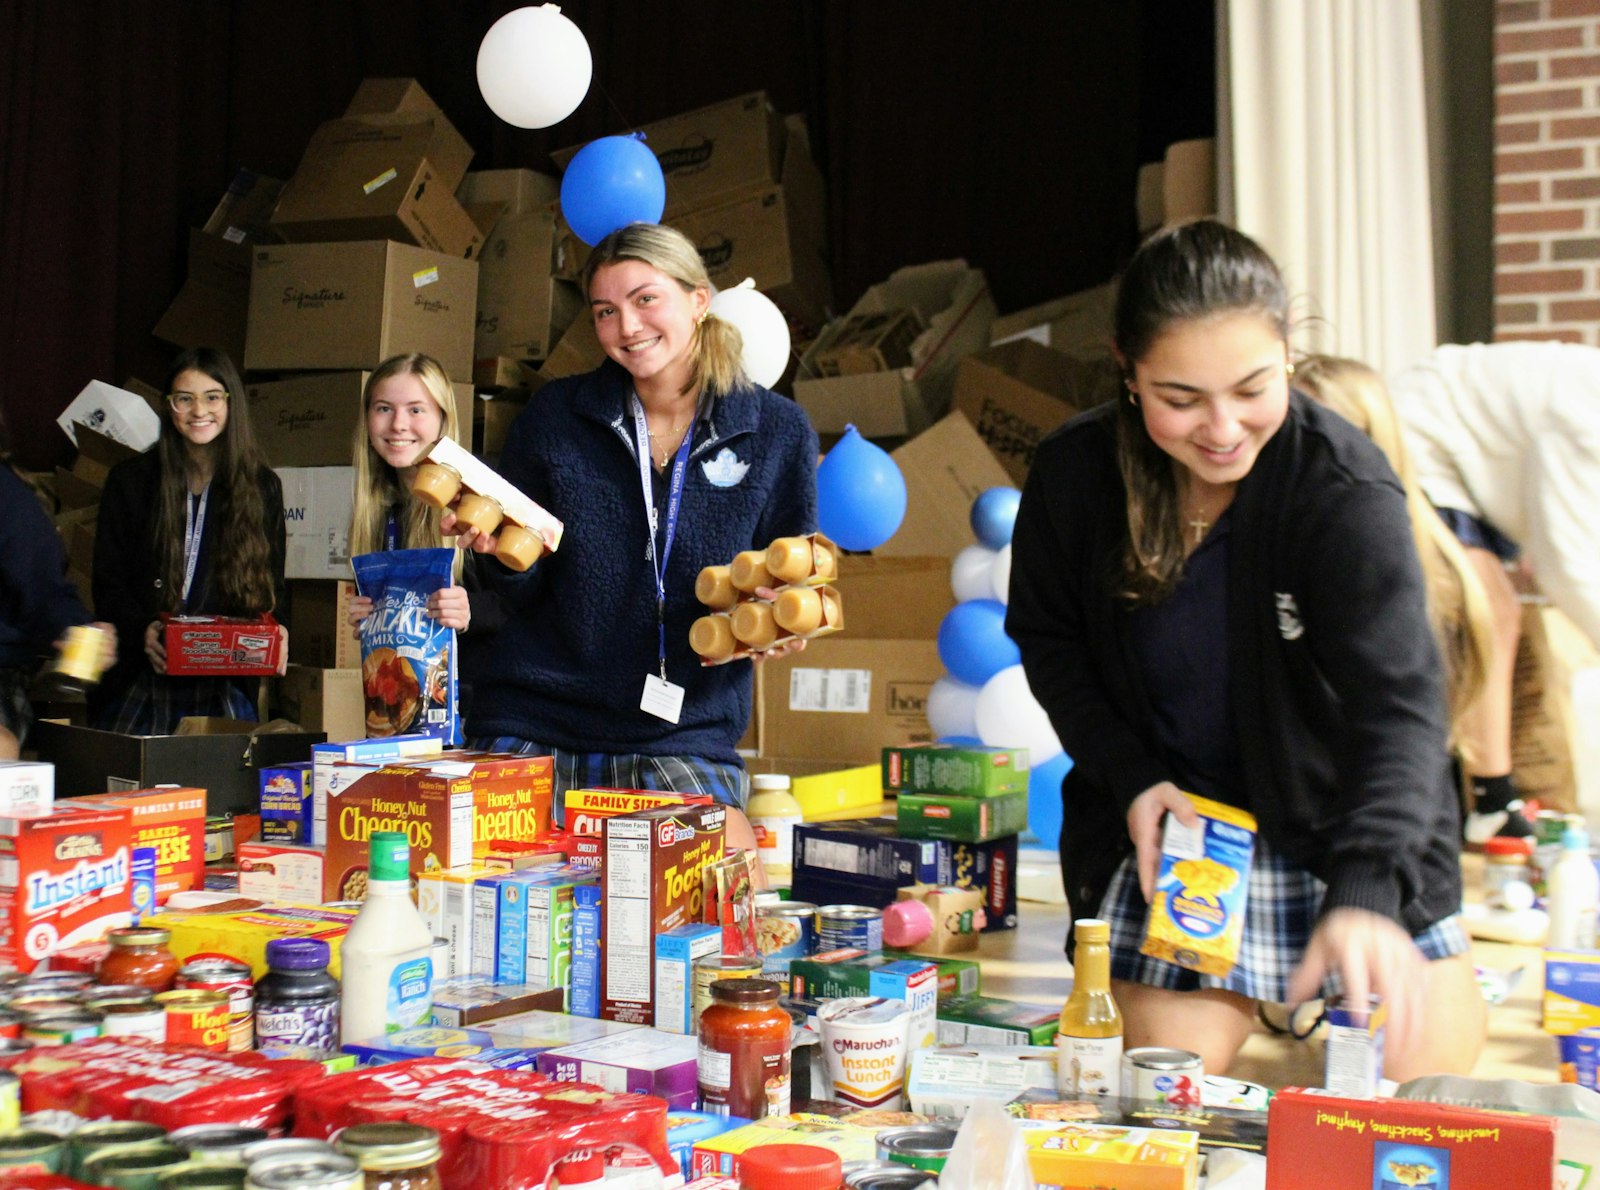 Regina High School students packed the entire stage in the cafeteria with nonperishable good, fulfilling its goal for its food drive and earning an extra day off for their Thanksgiving break. The donated items are going to six food pantries in the Detroit area. (Photo courtesy of Regina High School)